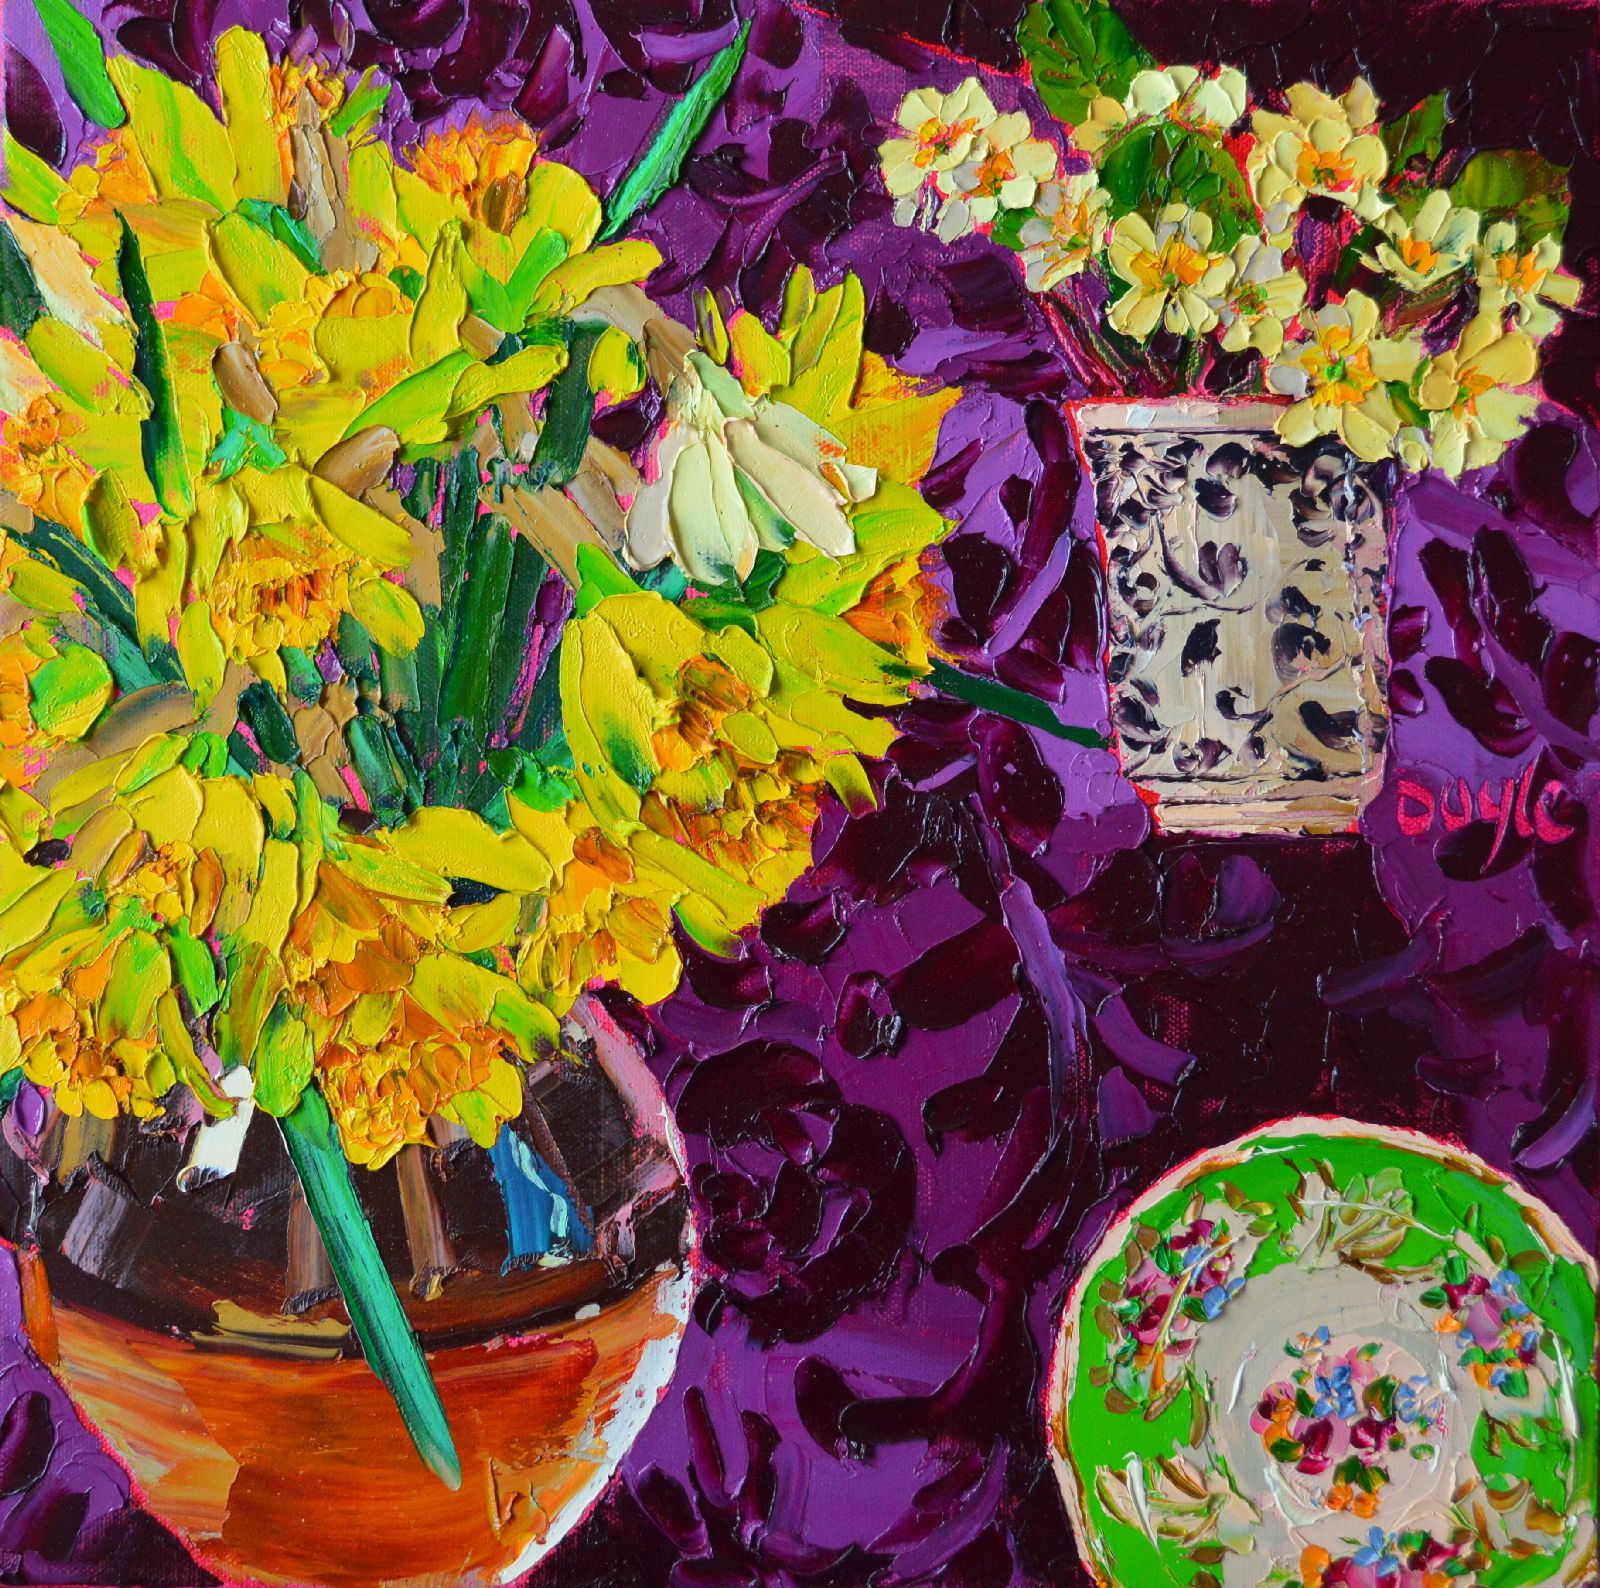 Primroses and Daffodils by Lucy Doyle